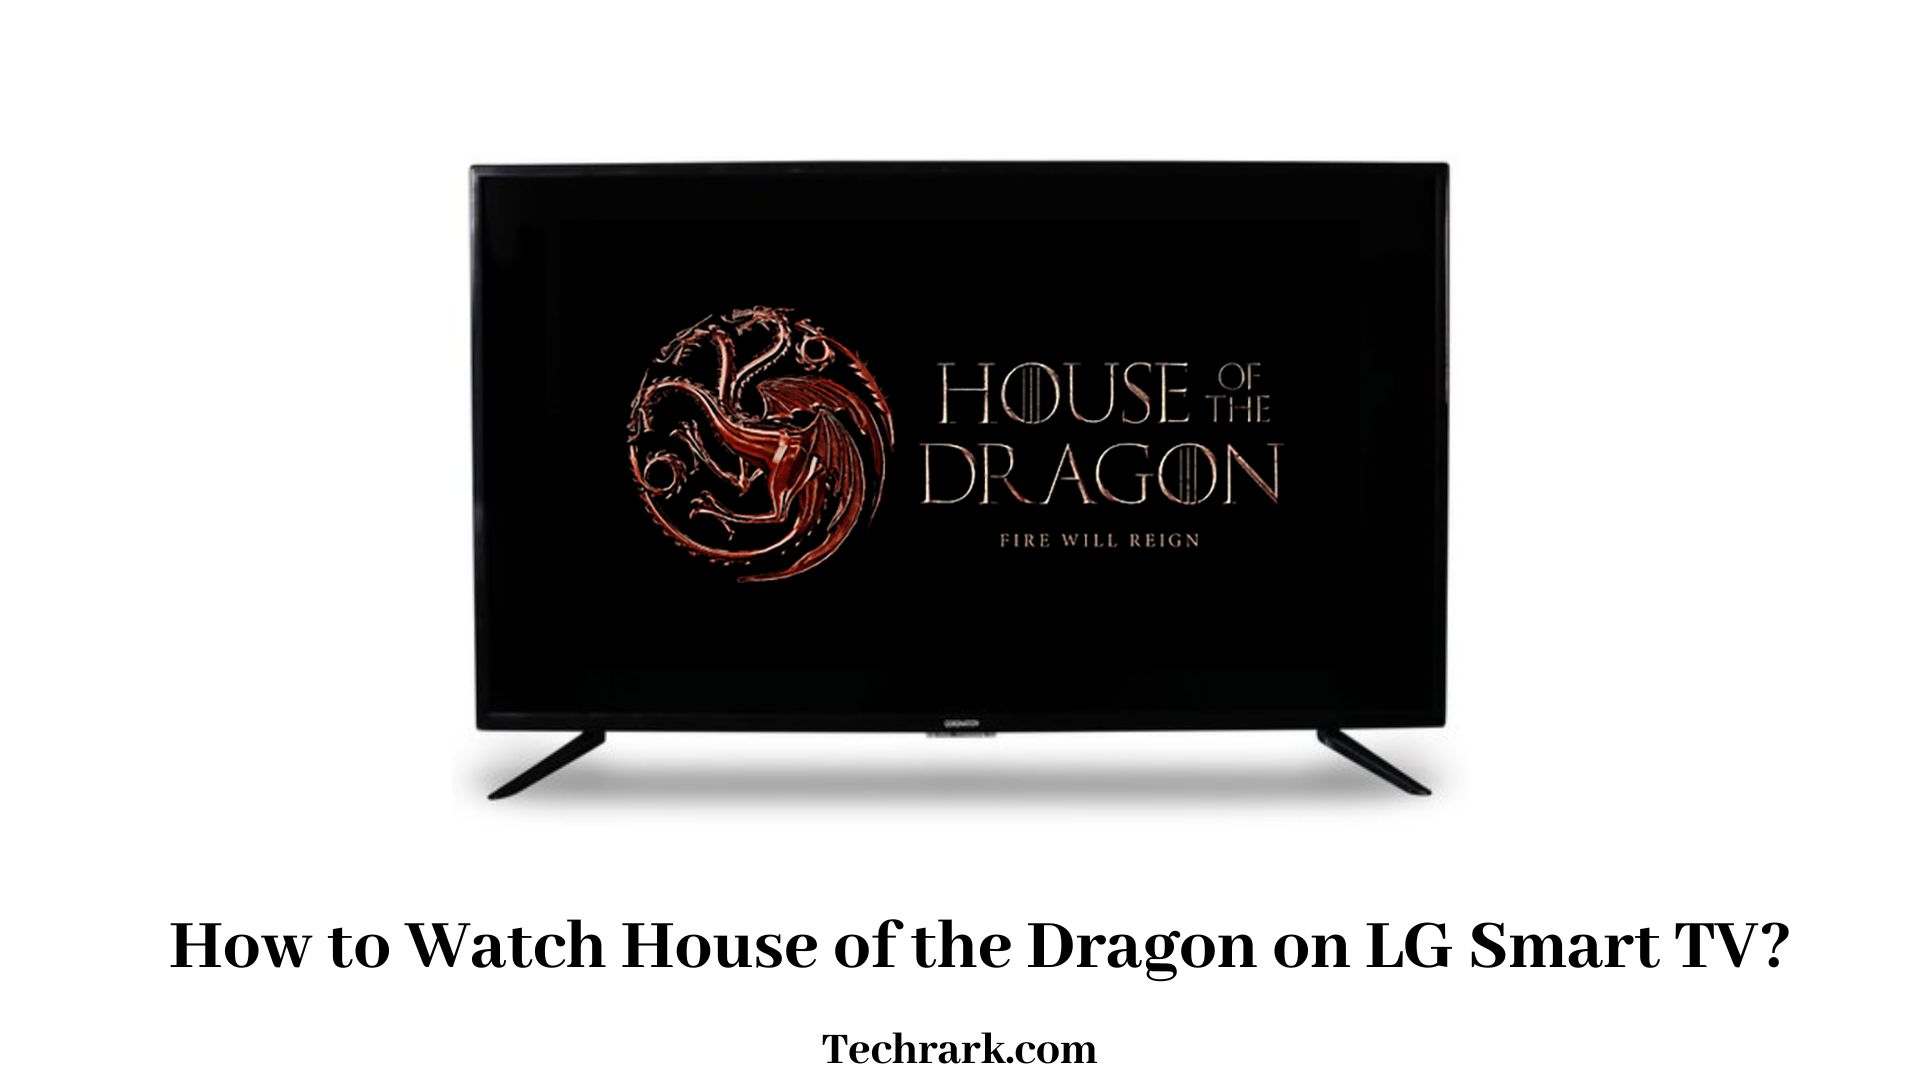 House of the Dragon on LG Smart TV